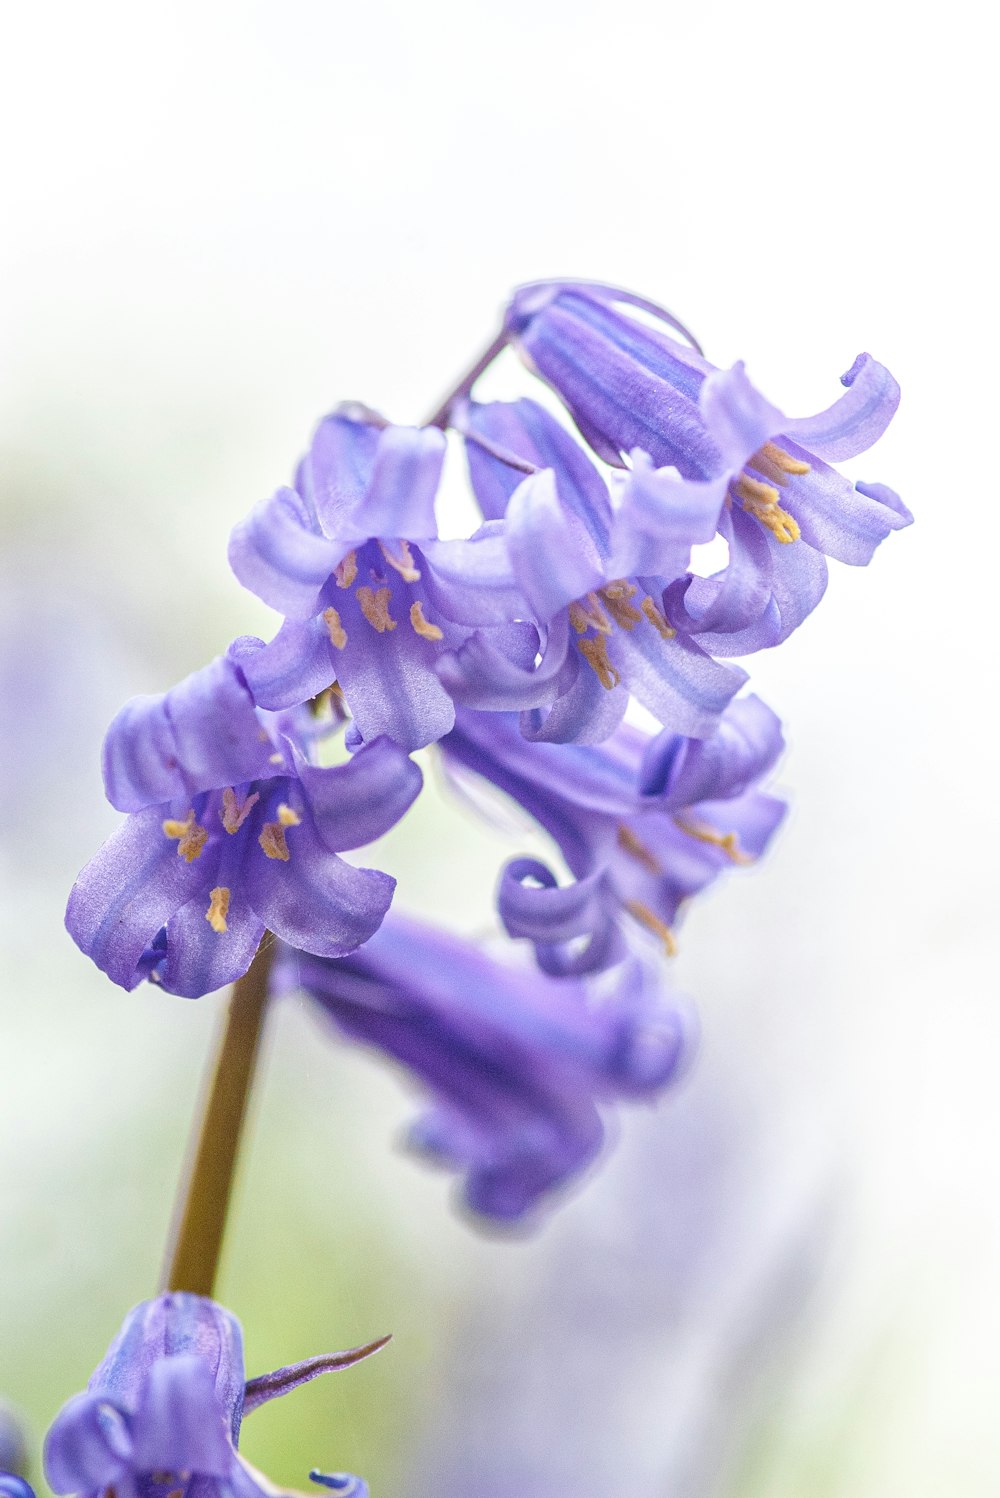 a close up of a purple flower with a blurry background